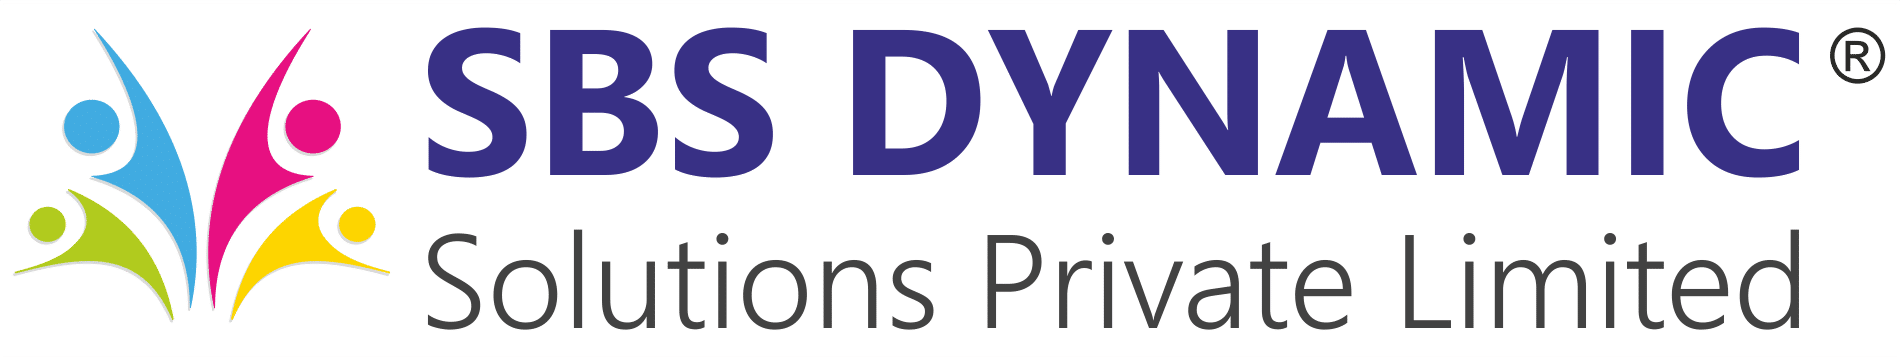 :: Welcome to : SBS Dynamic Solutions Pvt. Ltd. | Nursing Manpower Services (Recruitment/Outsourcing/Locum) Job Placement Agency In Mumbai, Maharashtra, India